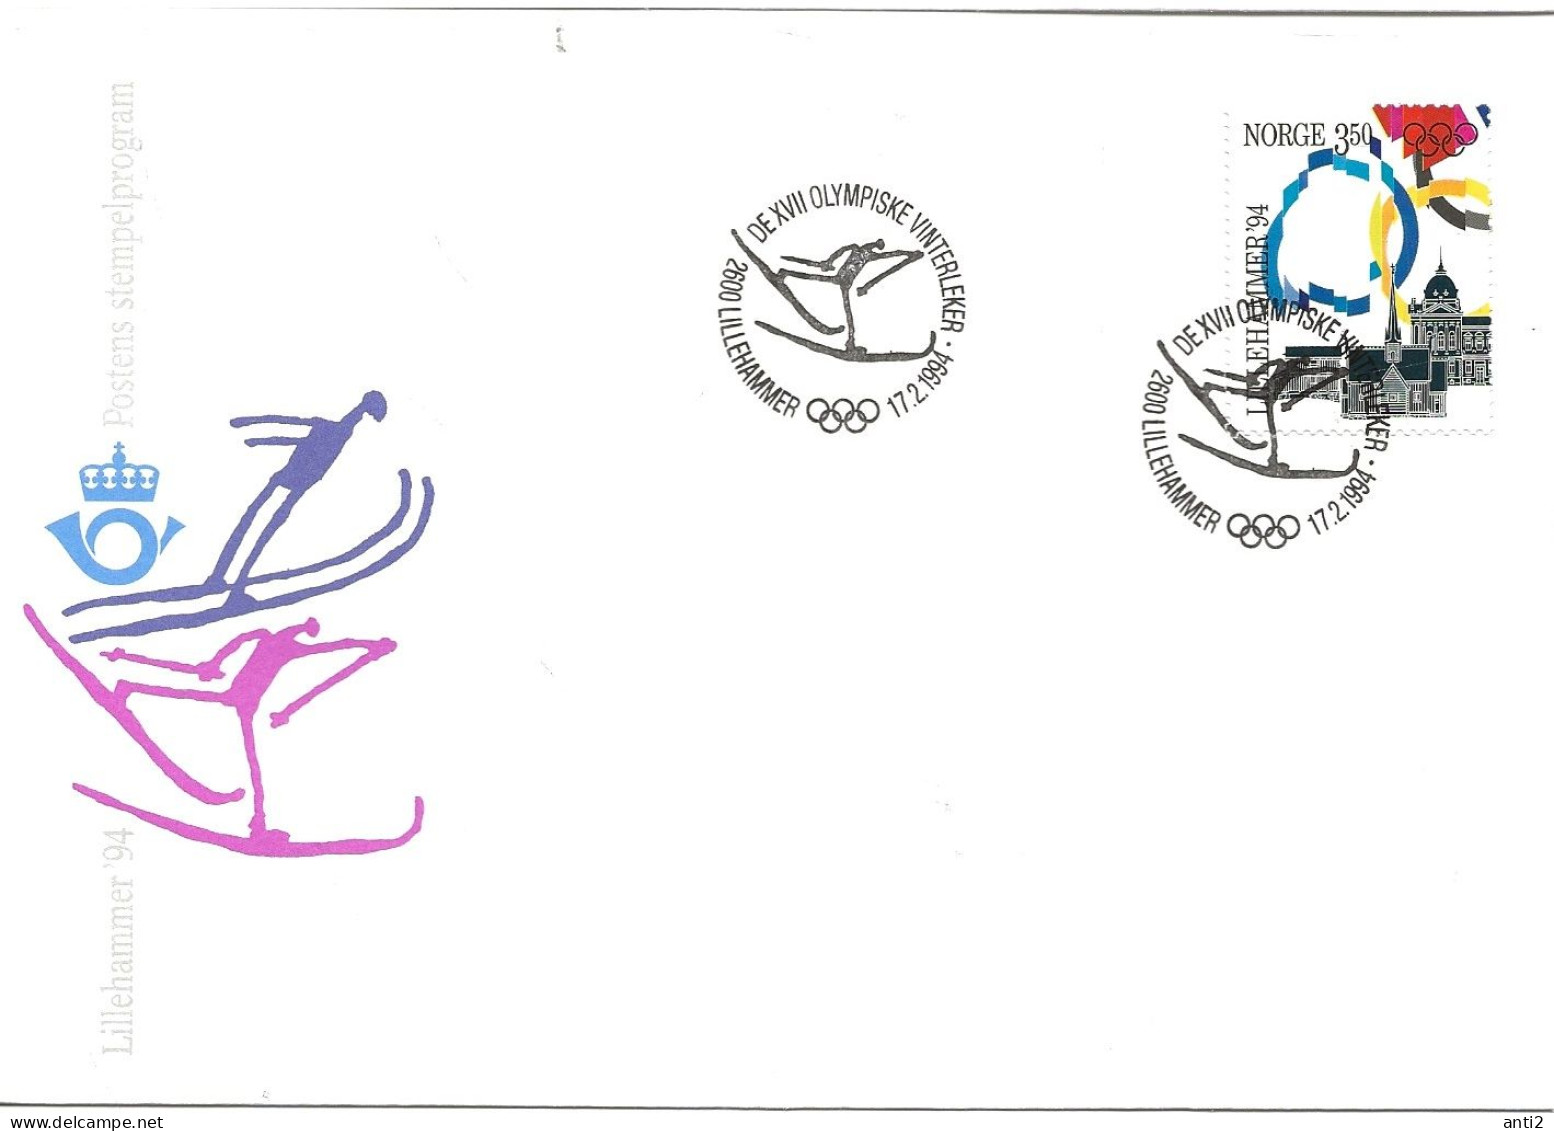 Norway Norge 1994 Winter Olympics, Lillehammer - Flags Mi 1148  Skiing Cross Country Cancelled Lillehammer 17.2.94 - Lettres & Documents